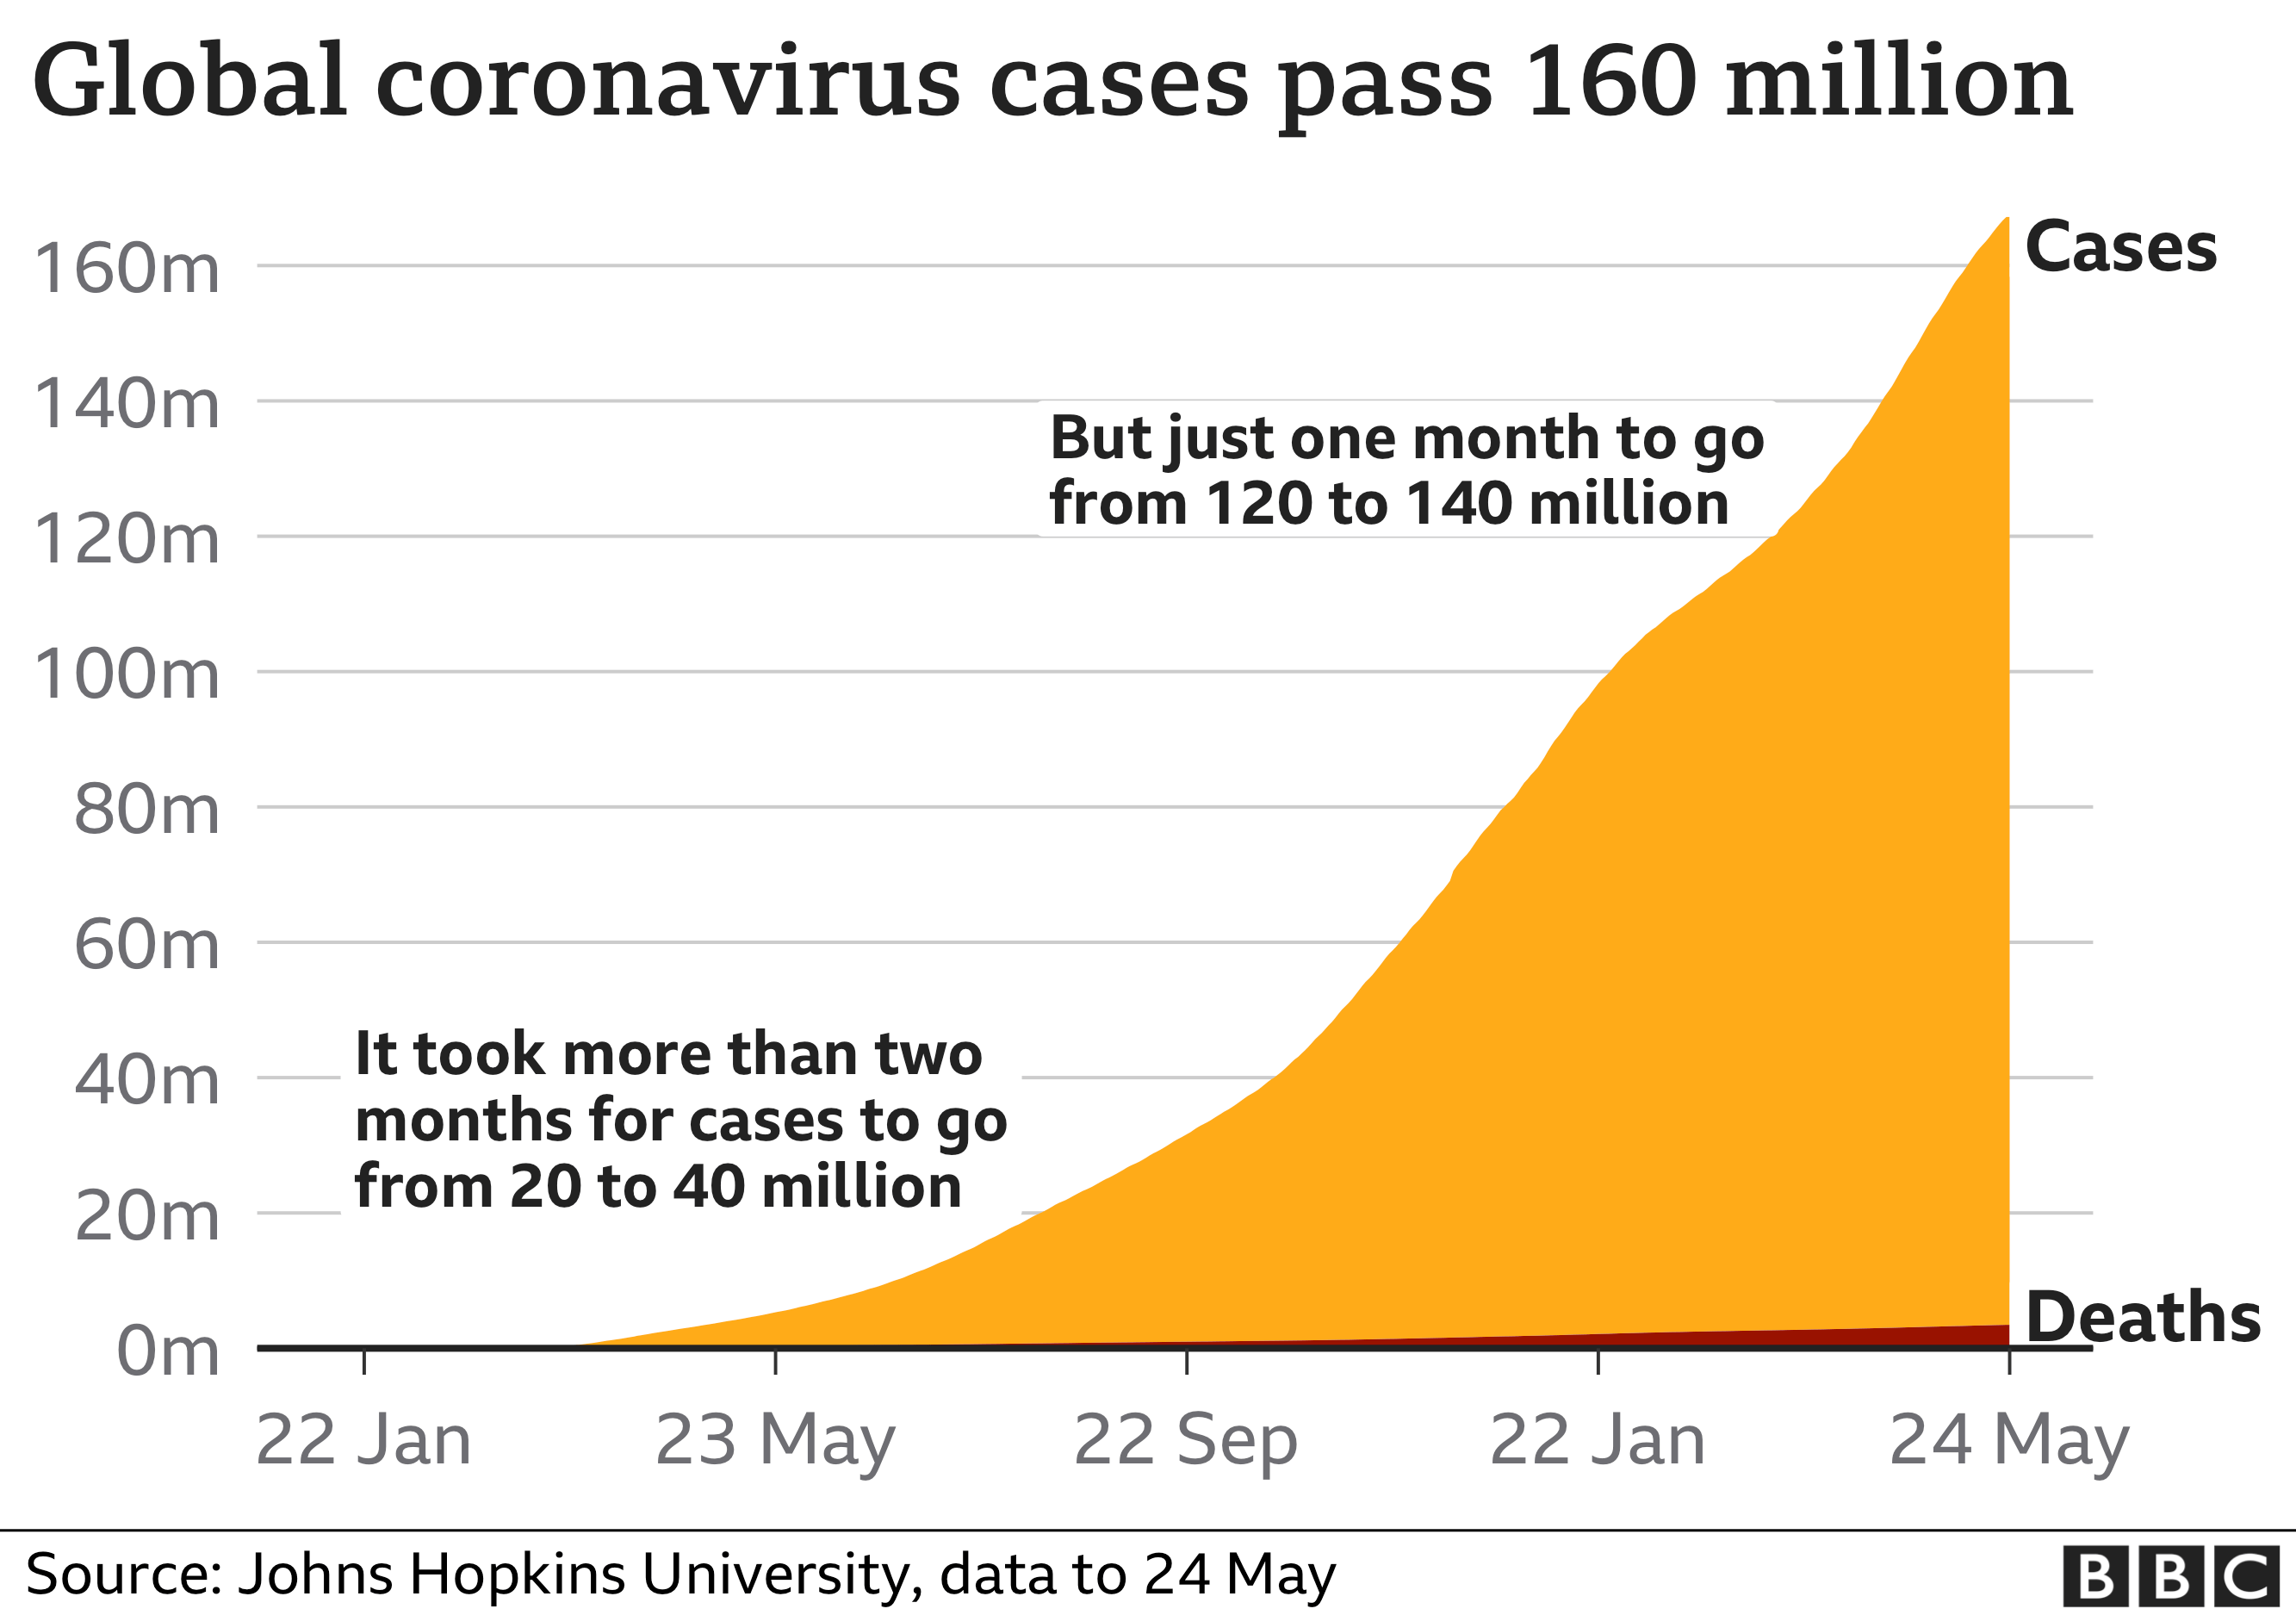 Chart showing there have been more than 165 million coronavirus cases reported worldwide. Updated 24 May.